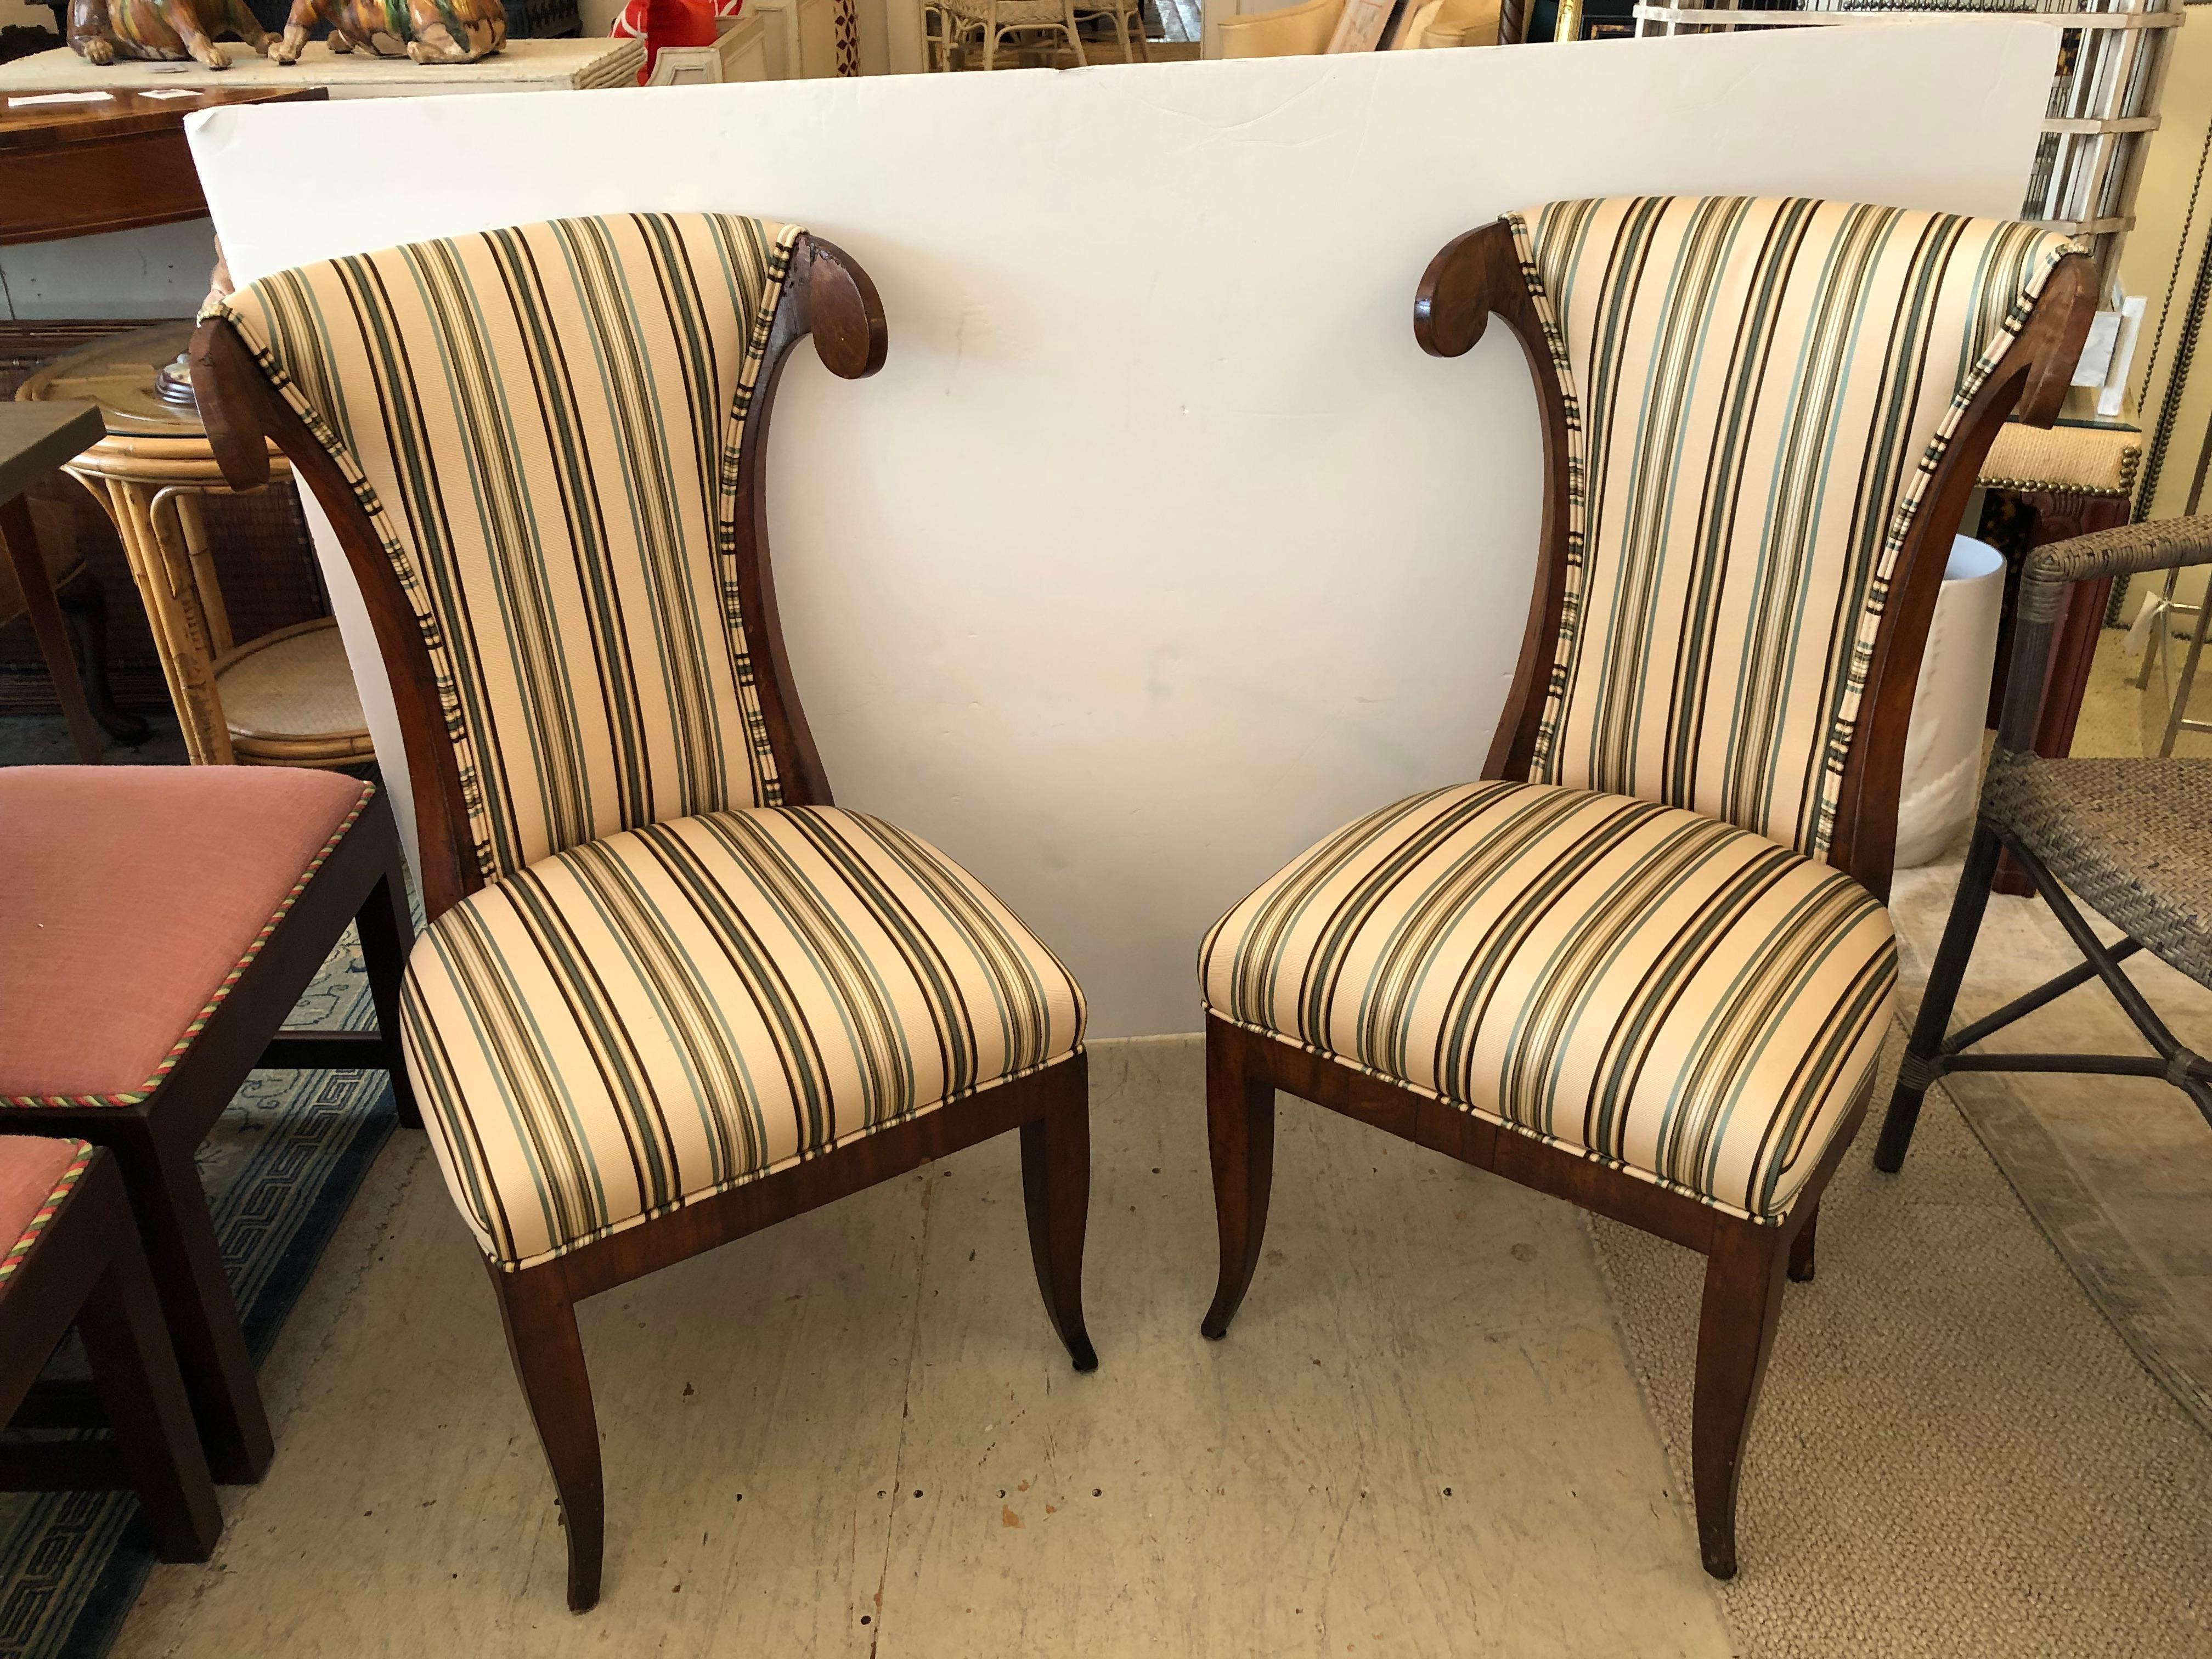 Great looking vintage pair of walnut klismos style chairs having elongated backs with curved tops, slightly splayed front legs, and new sassy striped upholstery.

Measures: seat w 19 seat height 17 seat depth 16.